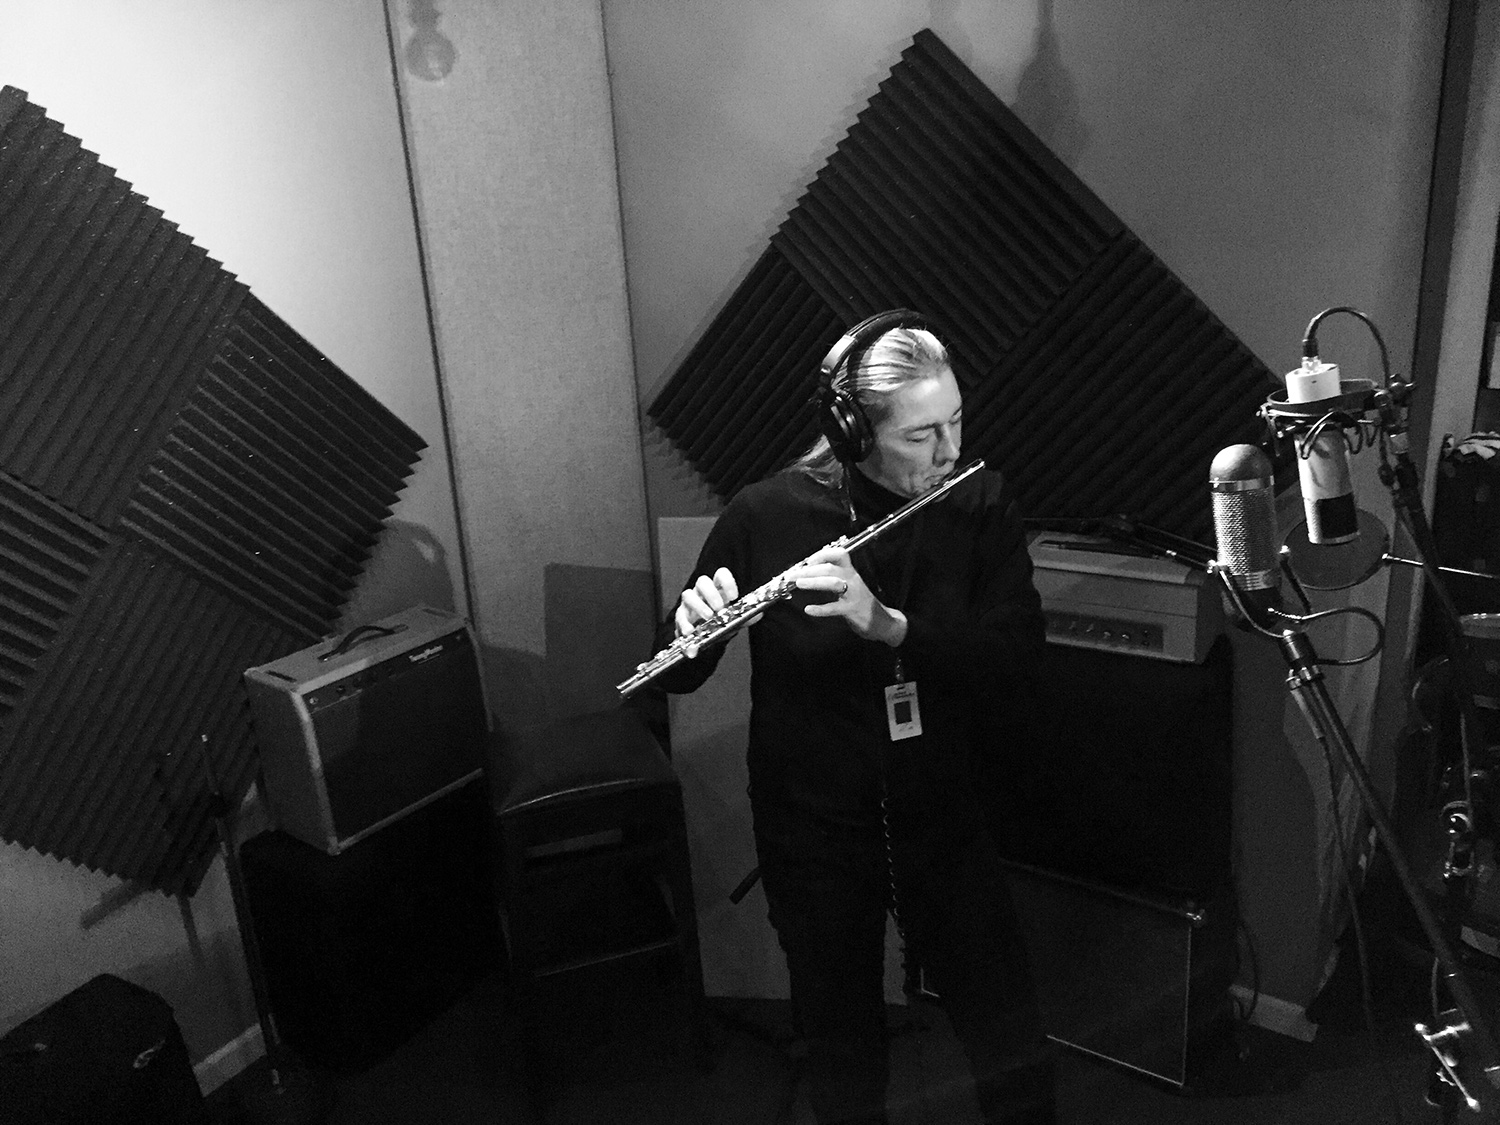 Martine Rothblatt in a professional recording studio playing her flute, black and white.